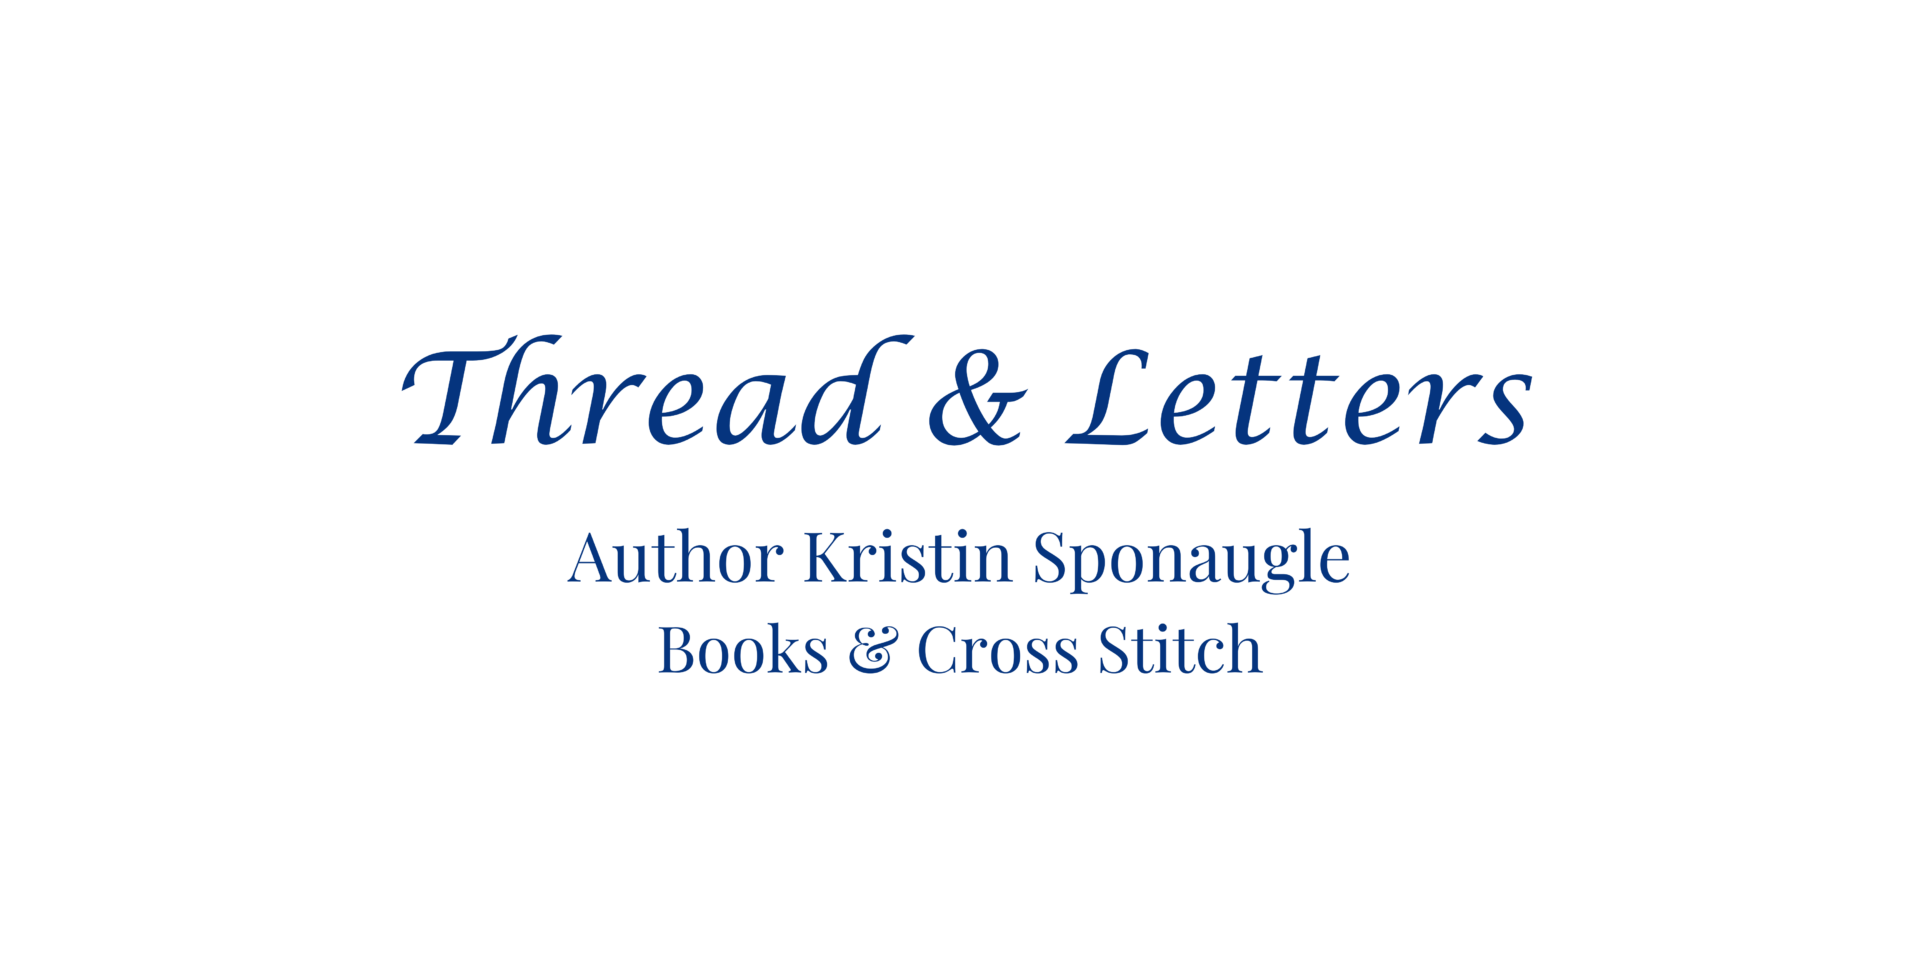 Thread & Letters